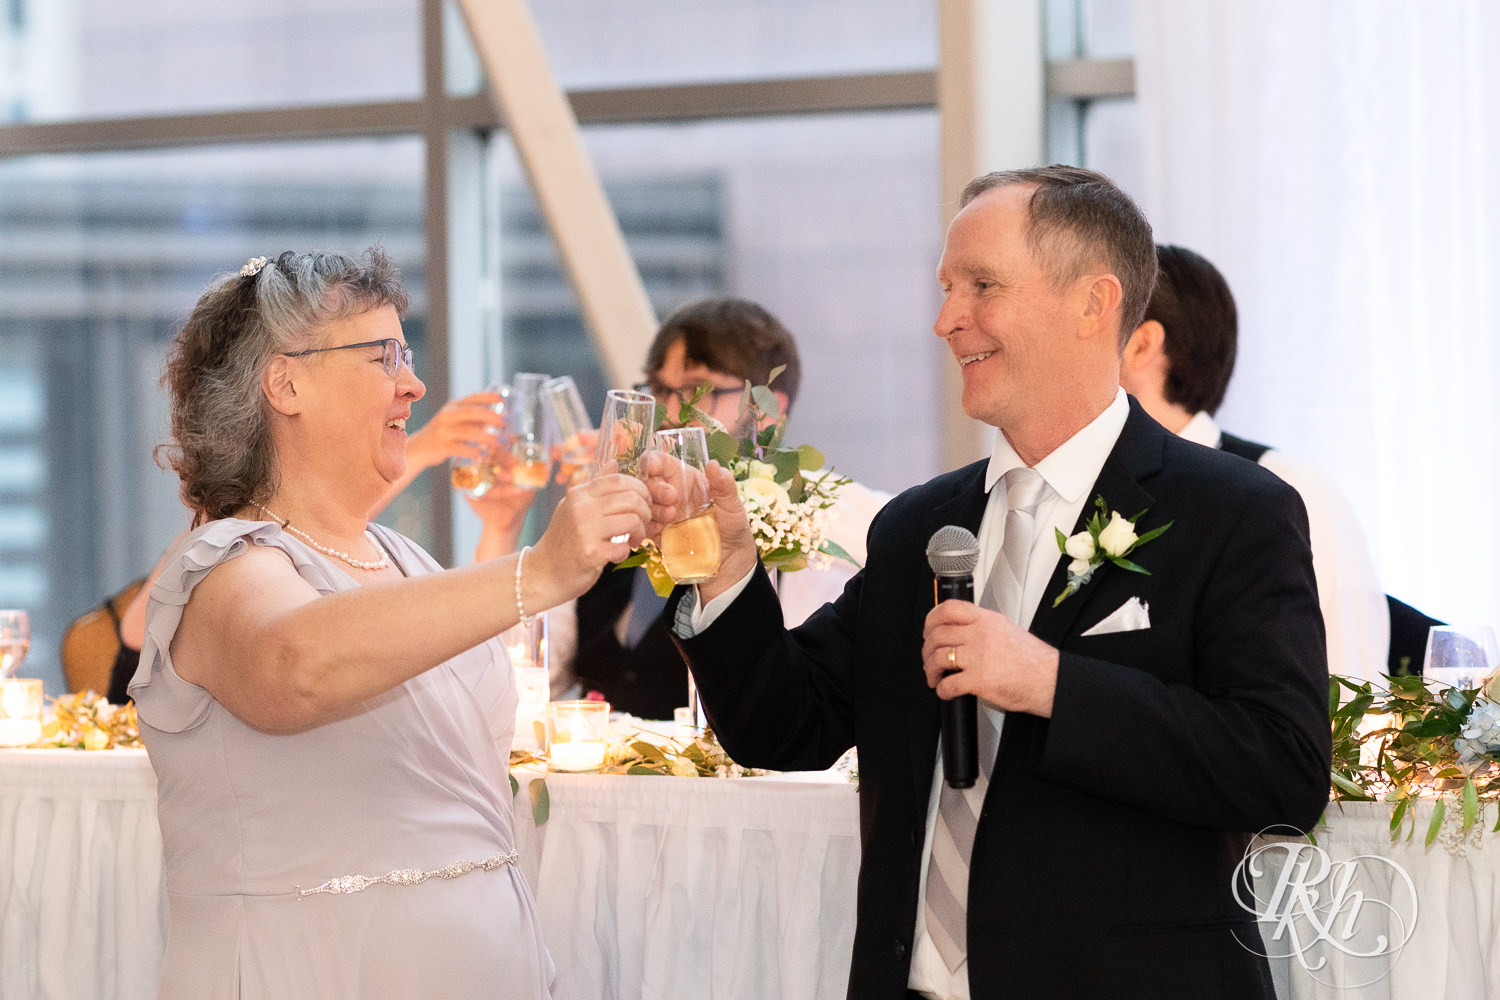 Mom and dad toast during wedding speeches at Doubletree Hilton Saint Paul in Saint Paul, Minnesota.